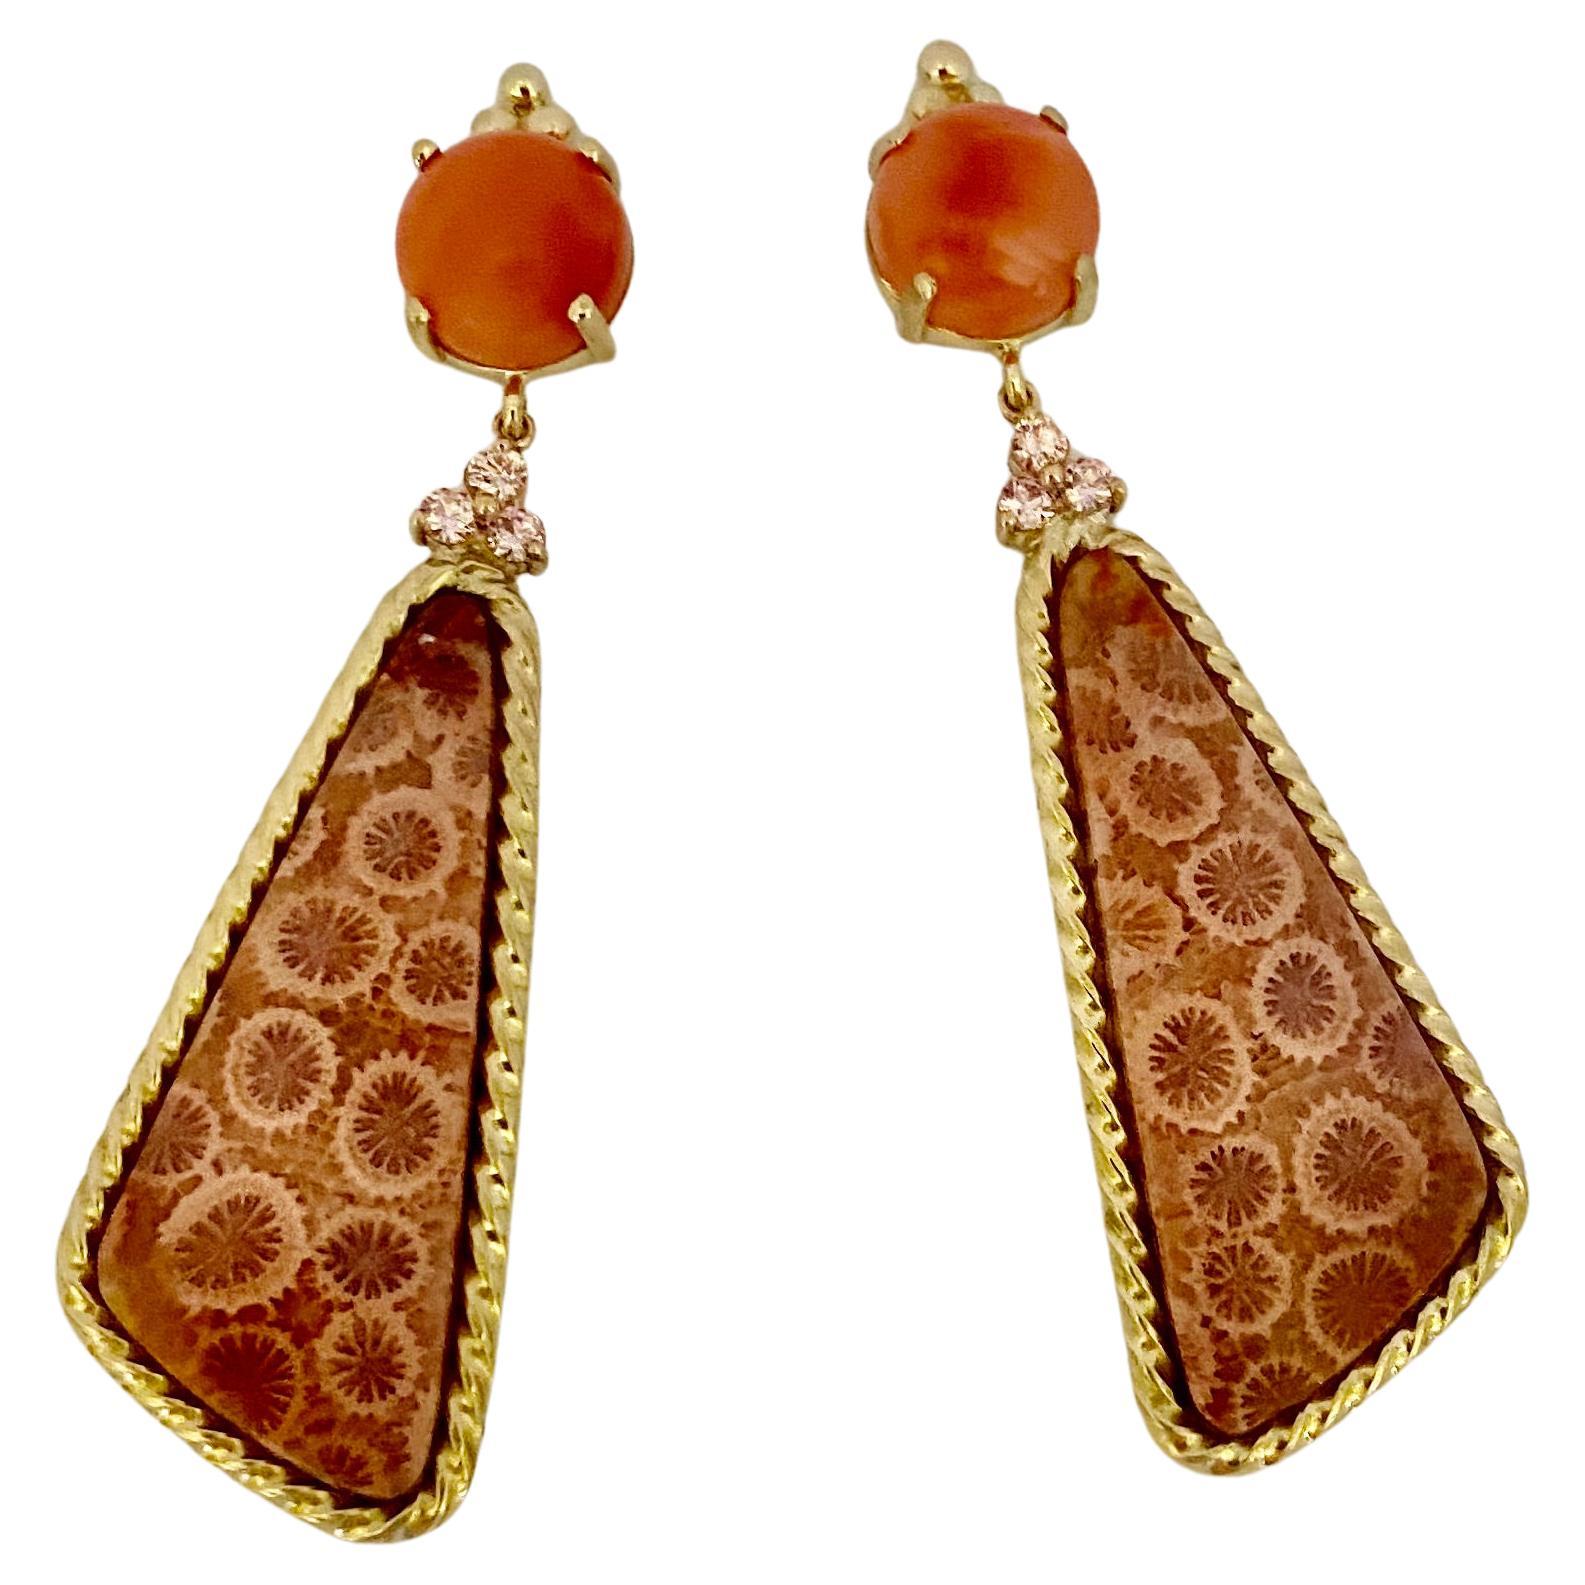 Coral is the primary gem in these dramatic dangle earrings.  The round cabochons (origin: Indonesia) are an intense salmon color and possess a glass-like polish.  They compliment the perfectly matched, fancy shaped agatized fossil coral cabochons